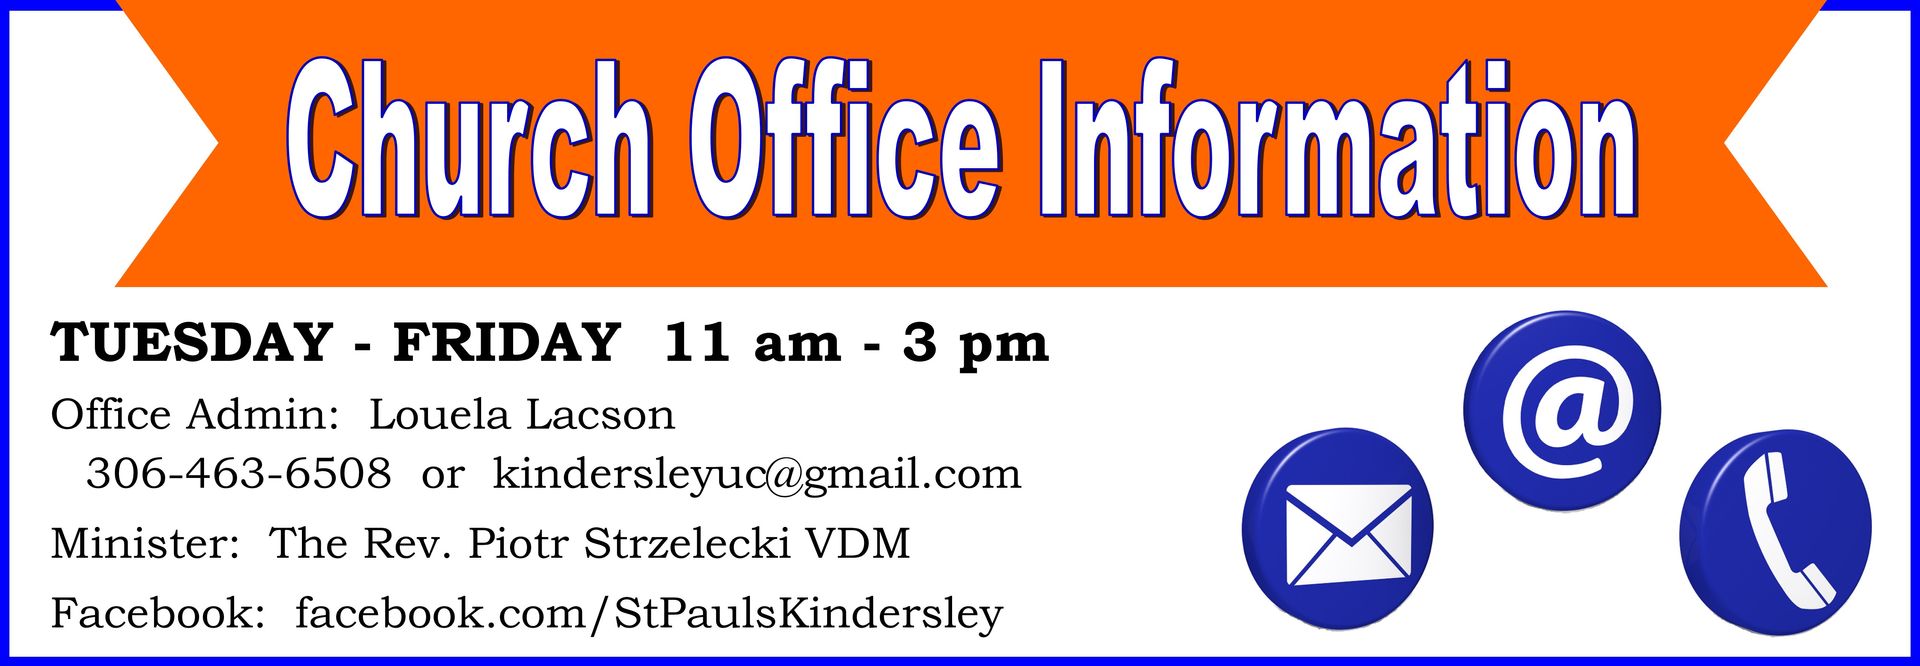 A graphic that reads “Church Office Information: Tuesday - Friday, 11 am - 3 pm. Office Admin: Louela Lacson, 306-463-6508 or kindersleyuc@gmail.com. Minister: The Rev. Piotr Strzelecki VDM. Facebook: facebook.com/StaulsKindersley”